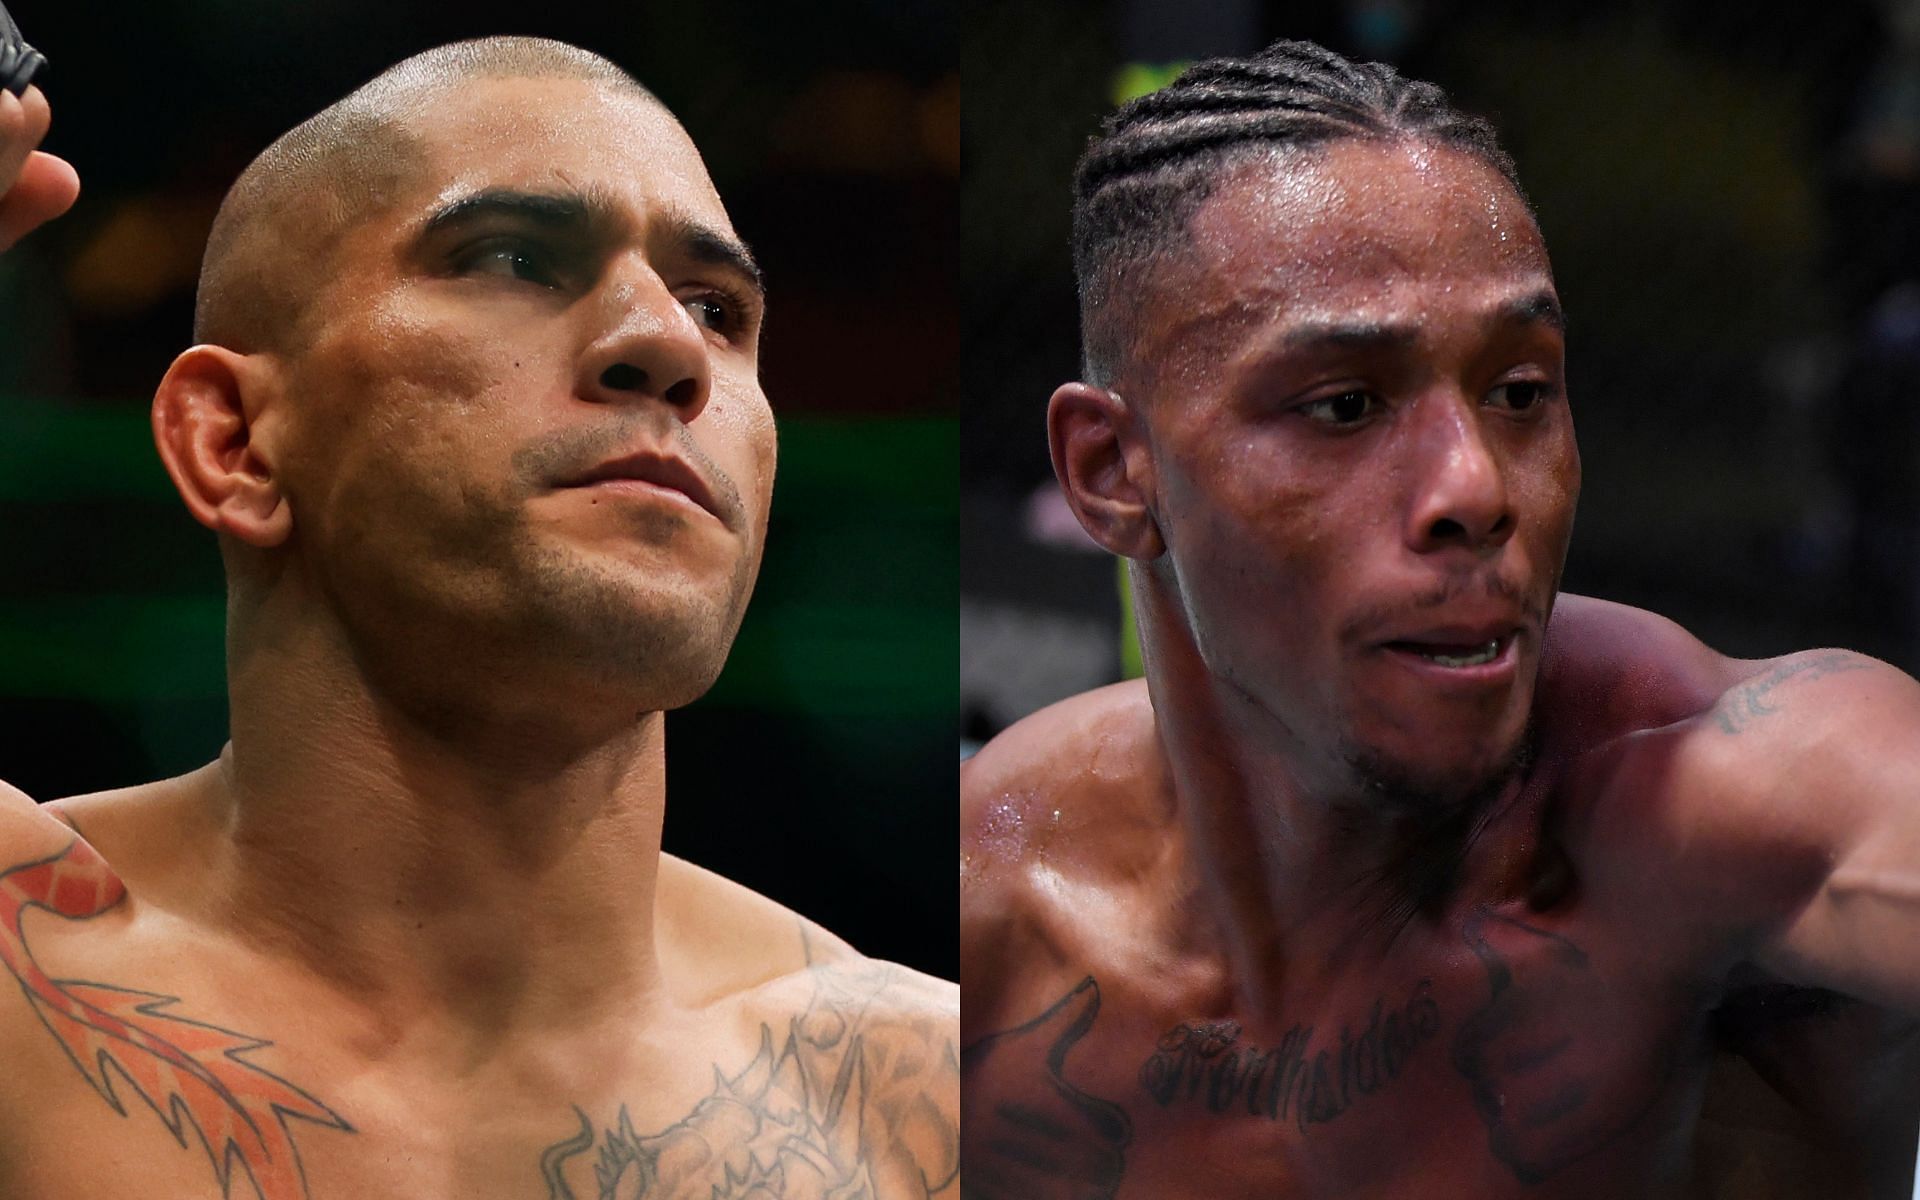 Alex Pereira (left) will face Jamahal Hill (right) in the main event match of UFC 300 [Images courtesy: Getty Images]